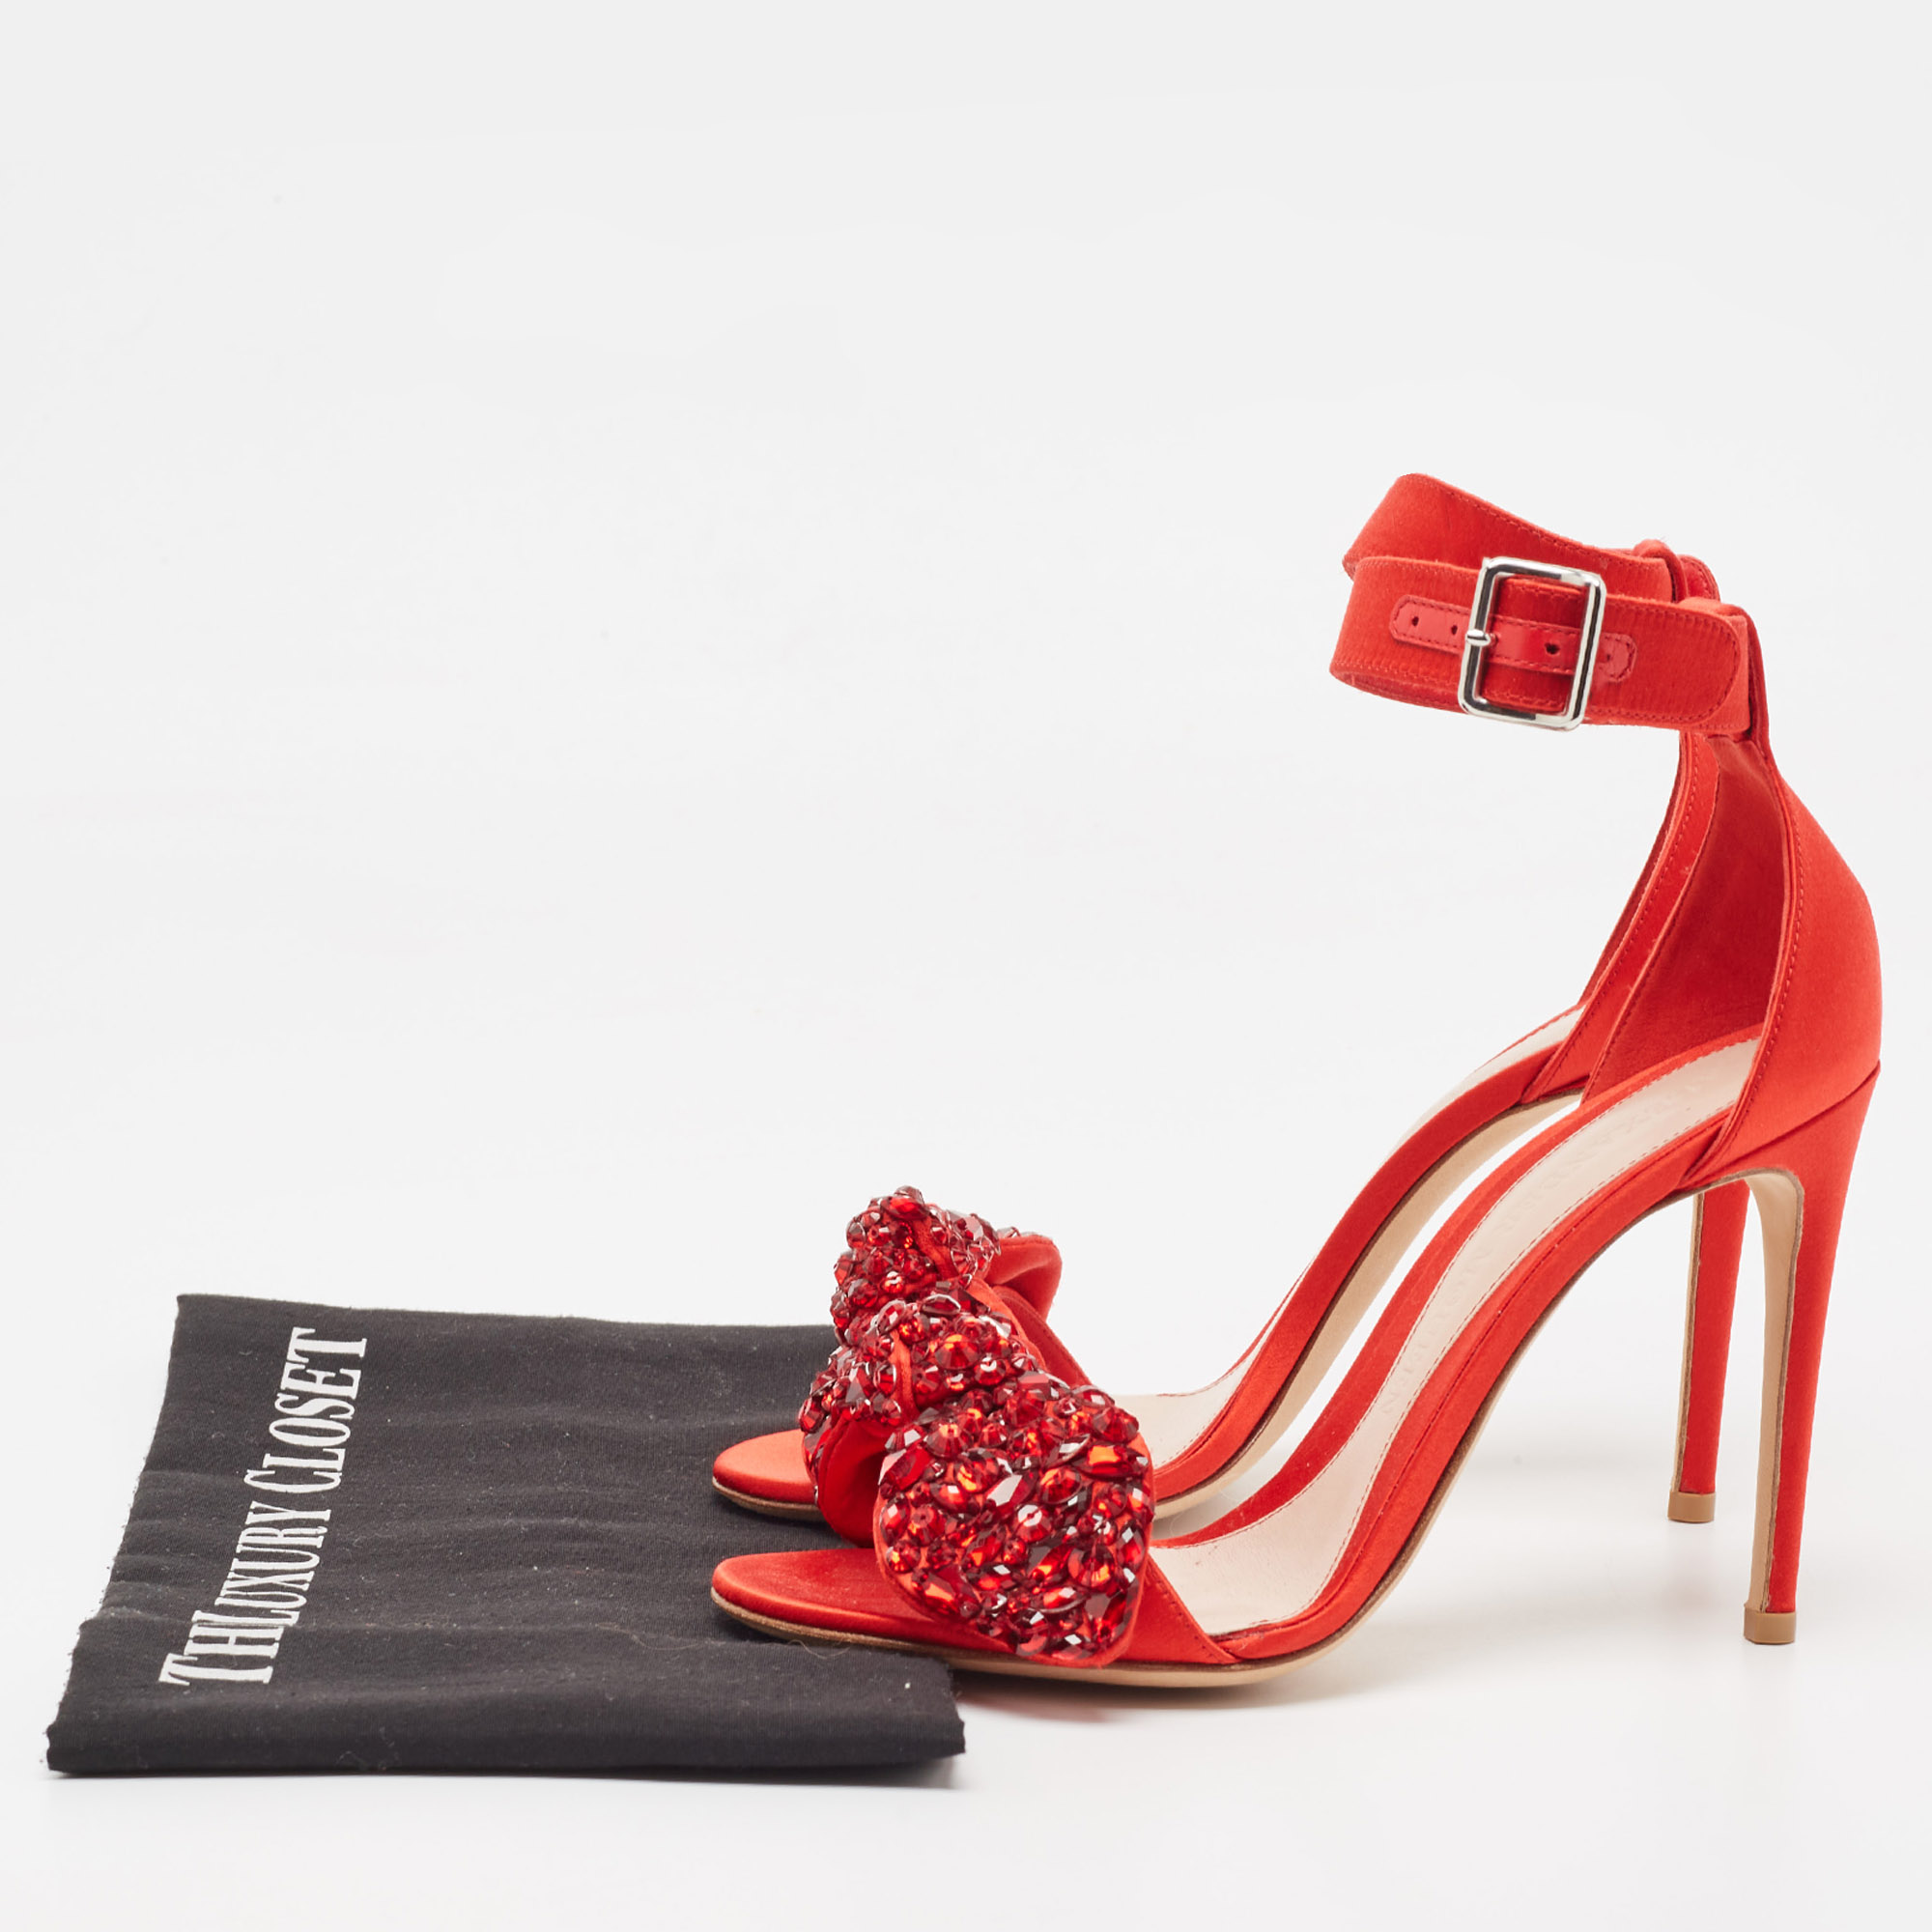 Alexander McQueen Red Satin Embellished Jewel Bow Ankle Strap Sandals Size 37